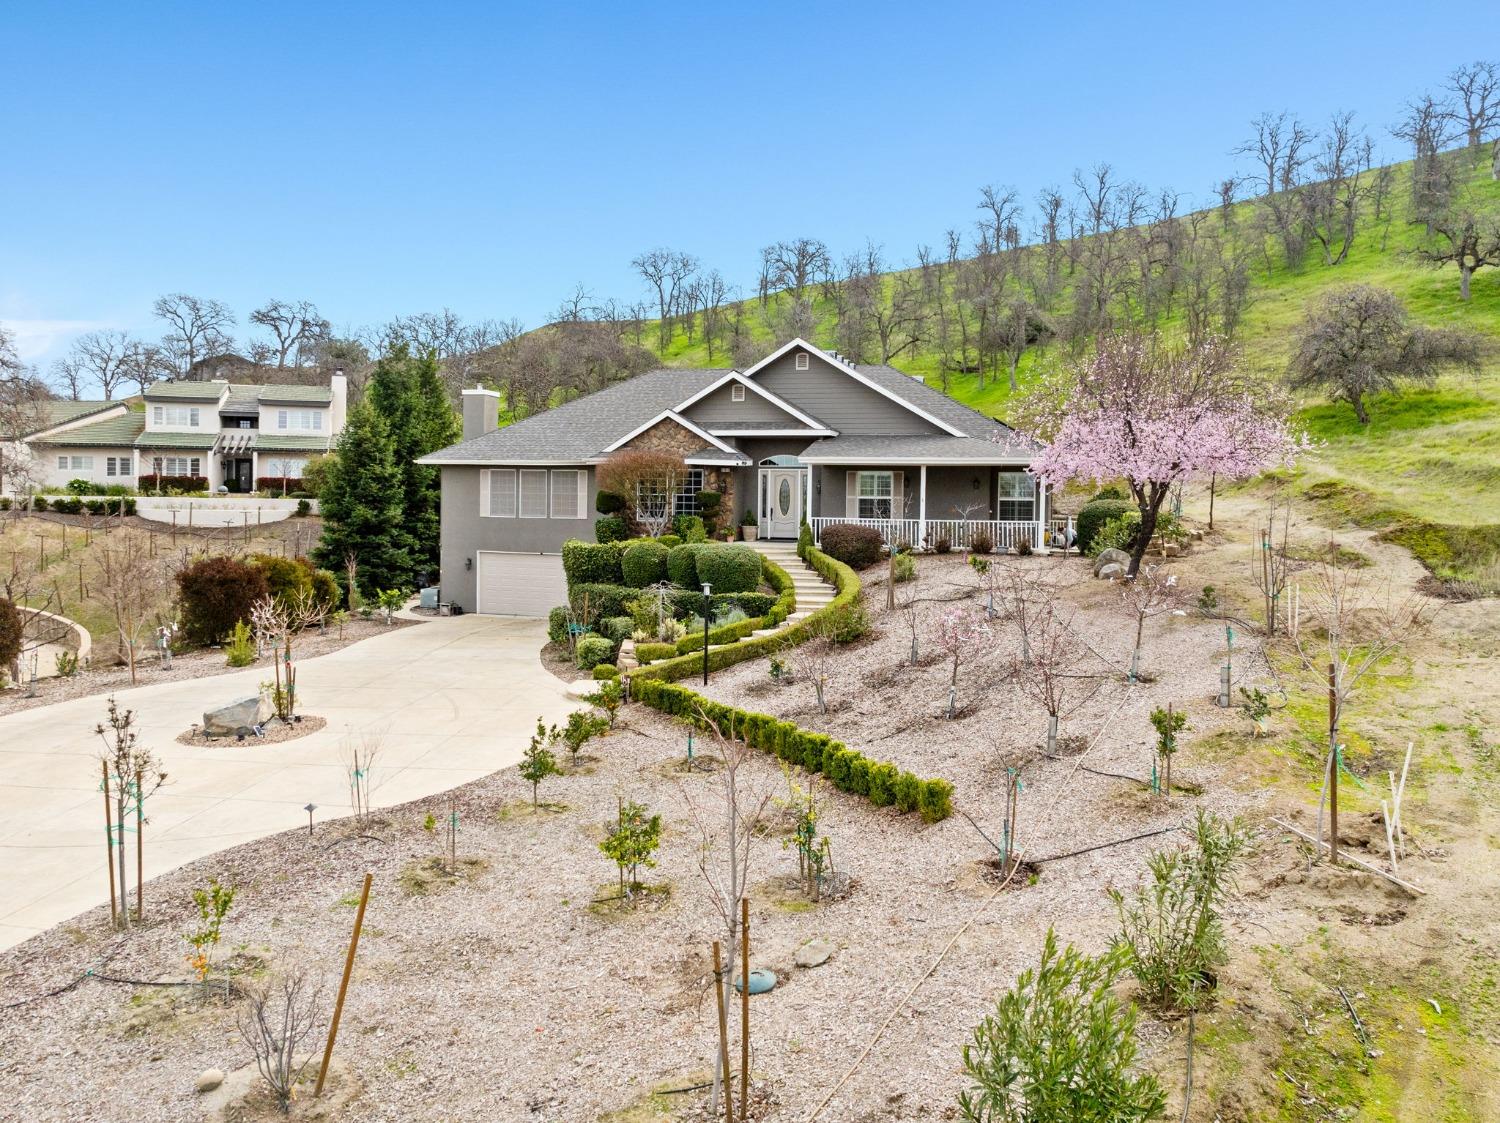 Photo of 21825 Glenhaven Ln in Friant, CA